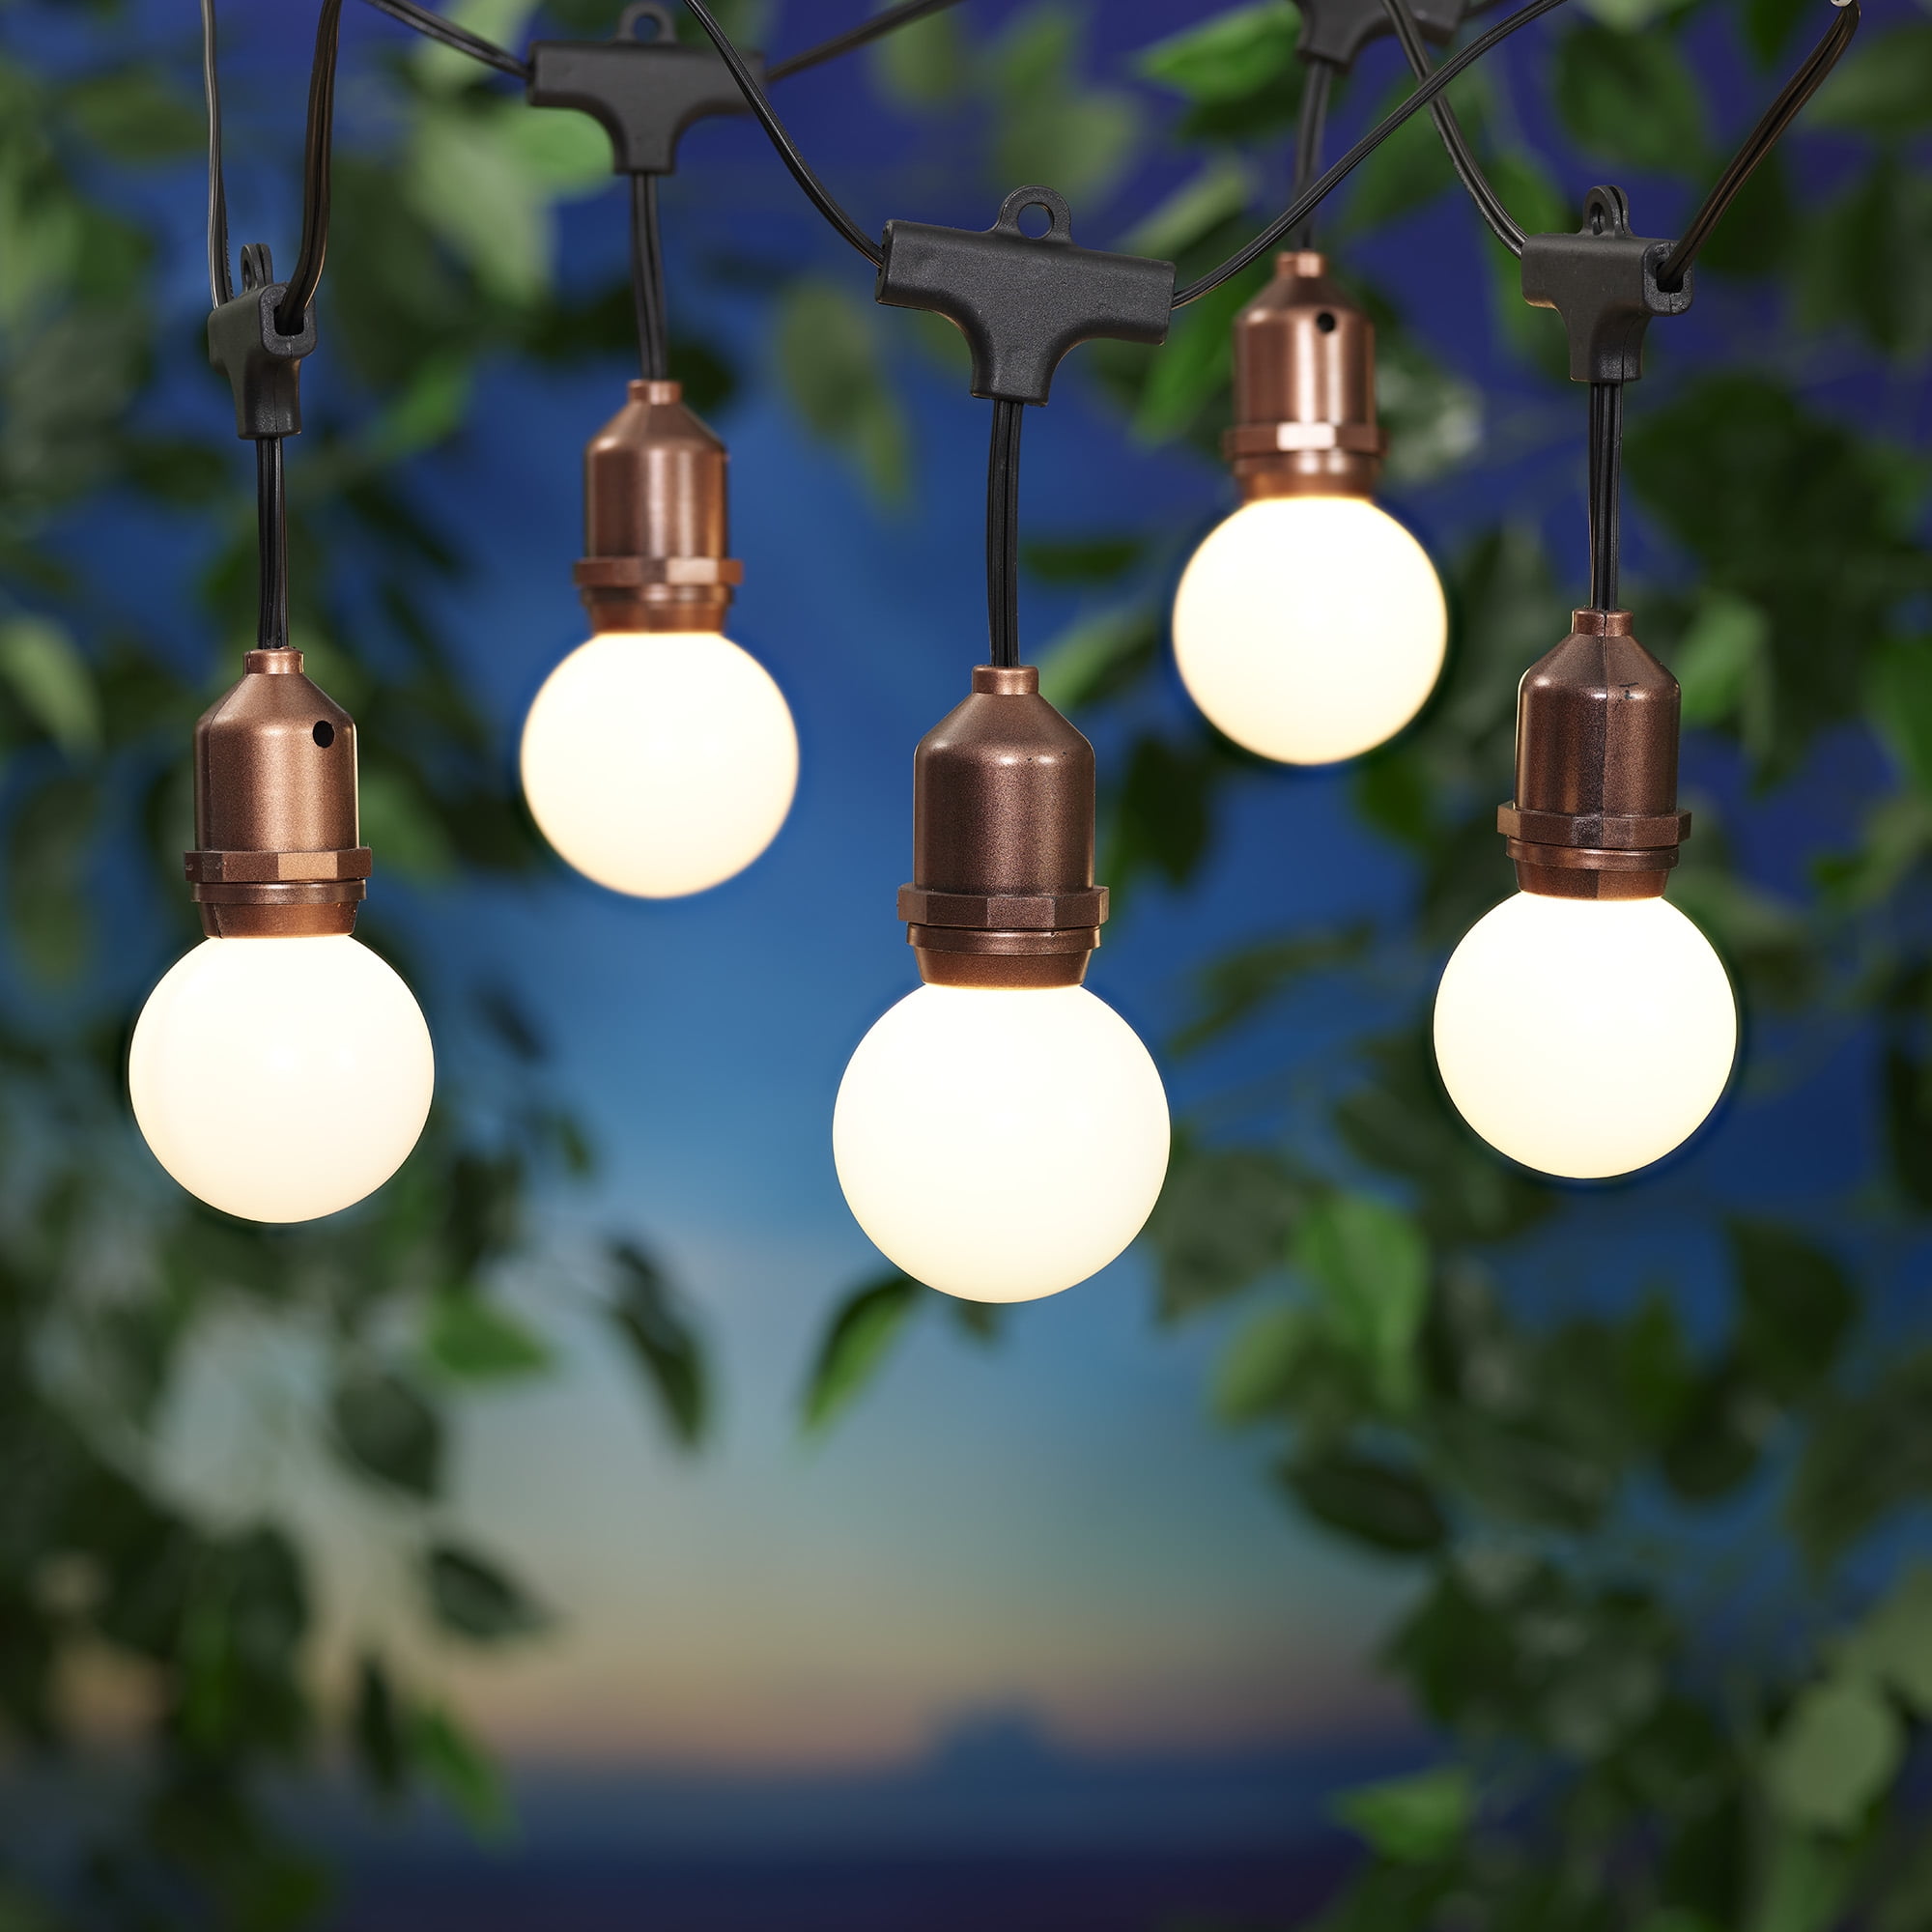 Better Homes & Gardens 10-Count Frosted Globe Outdoor String Lights, with Warm White LED Lights